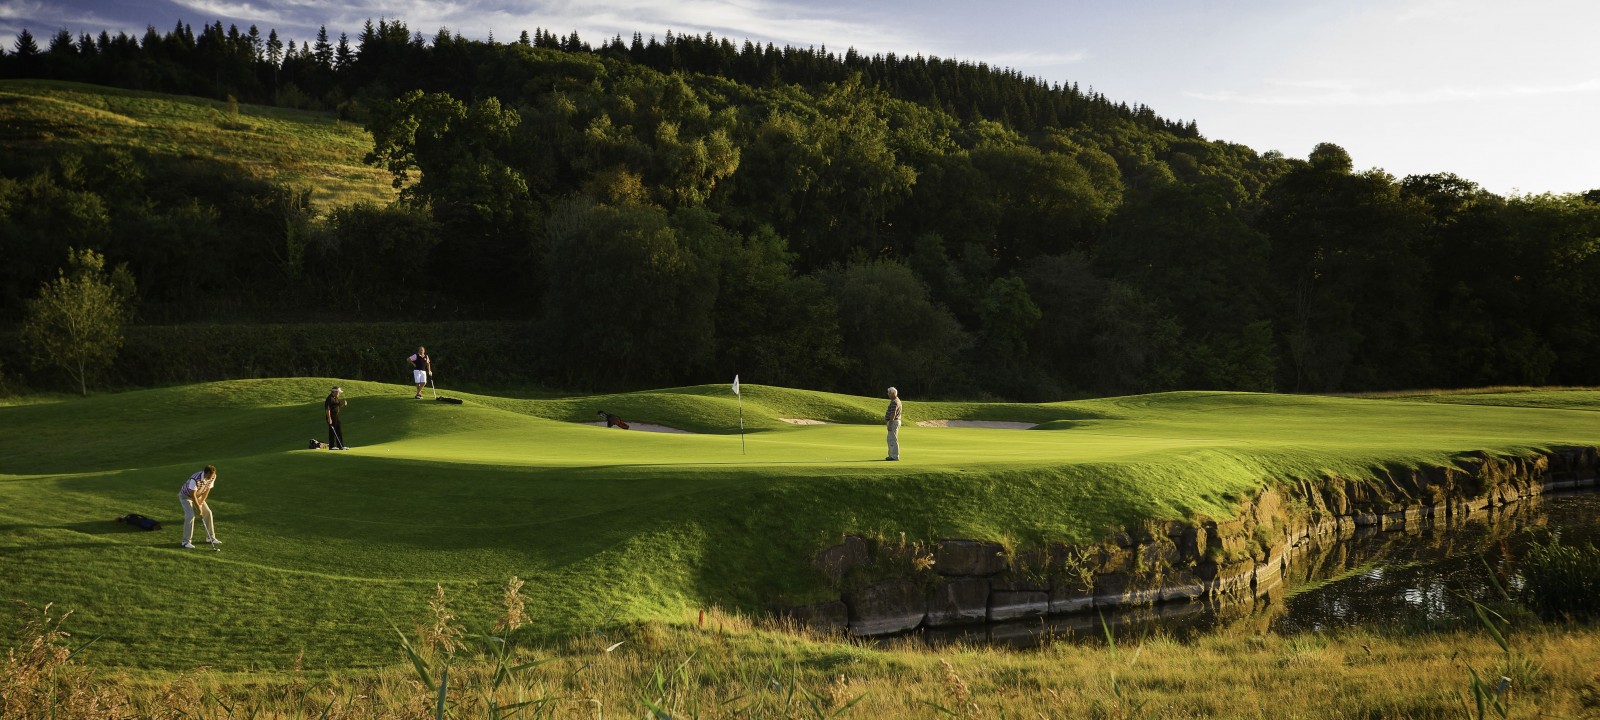 Fourball on the Twenty Ten Ryder Cup Course with 1 Night Stay at the 5* Celtic Manor Resort 